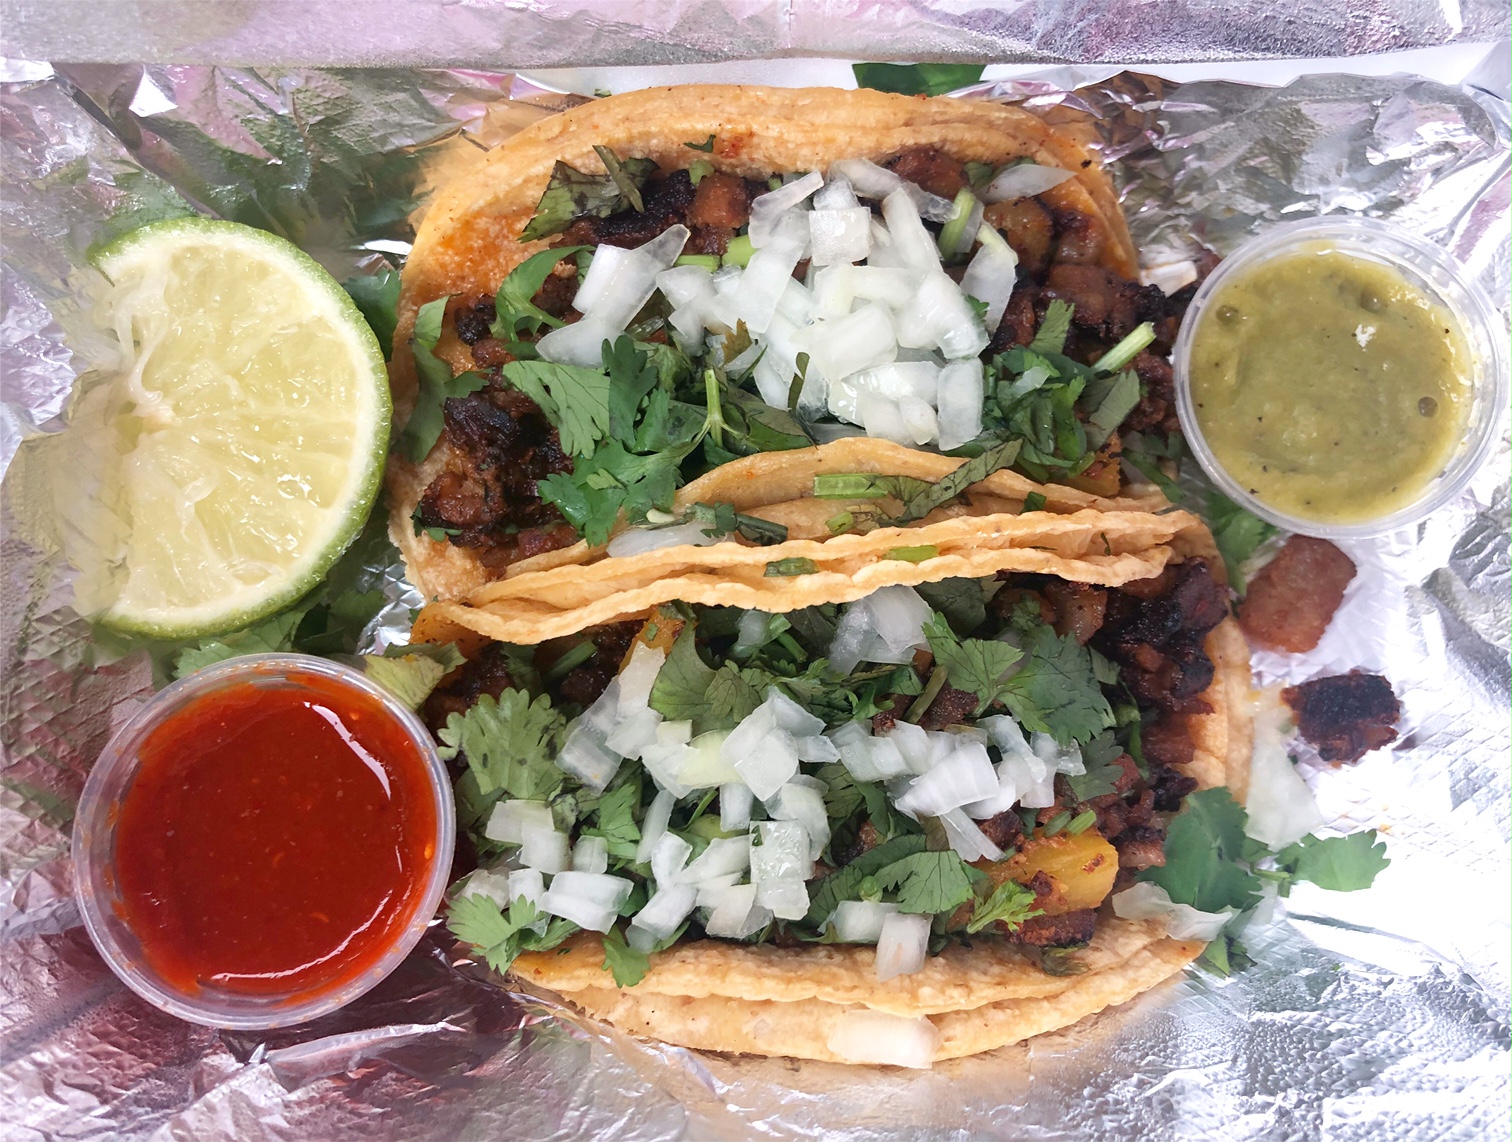 In a tin foil lined takeout container, there are two al pastor tacos, one lime wedge, a small cup of red salsa, and a small cup of green salsa. Photo by Alyssa Buckley.